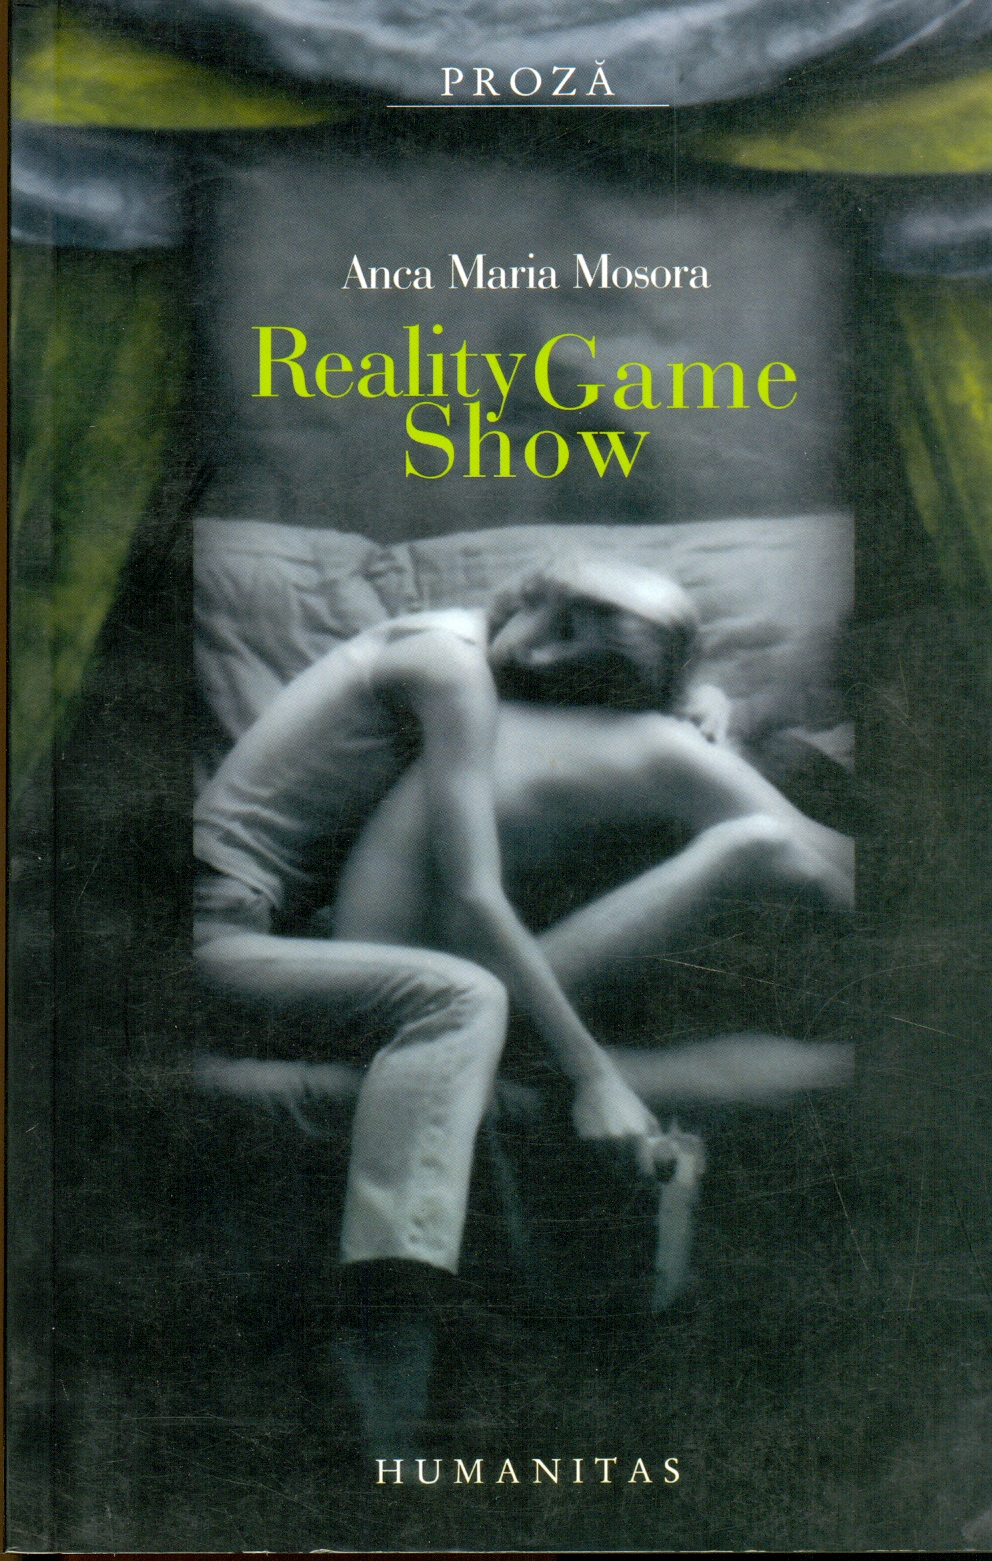 REALITY GAME SHOW